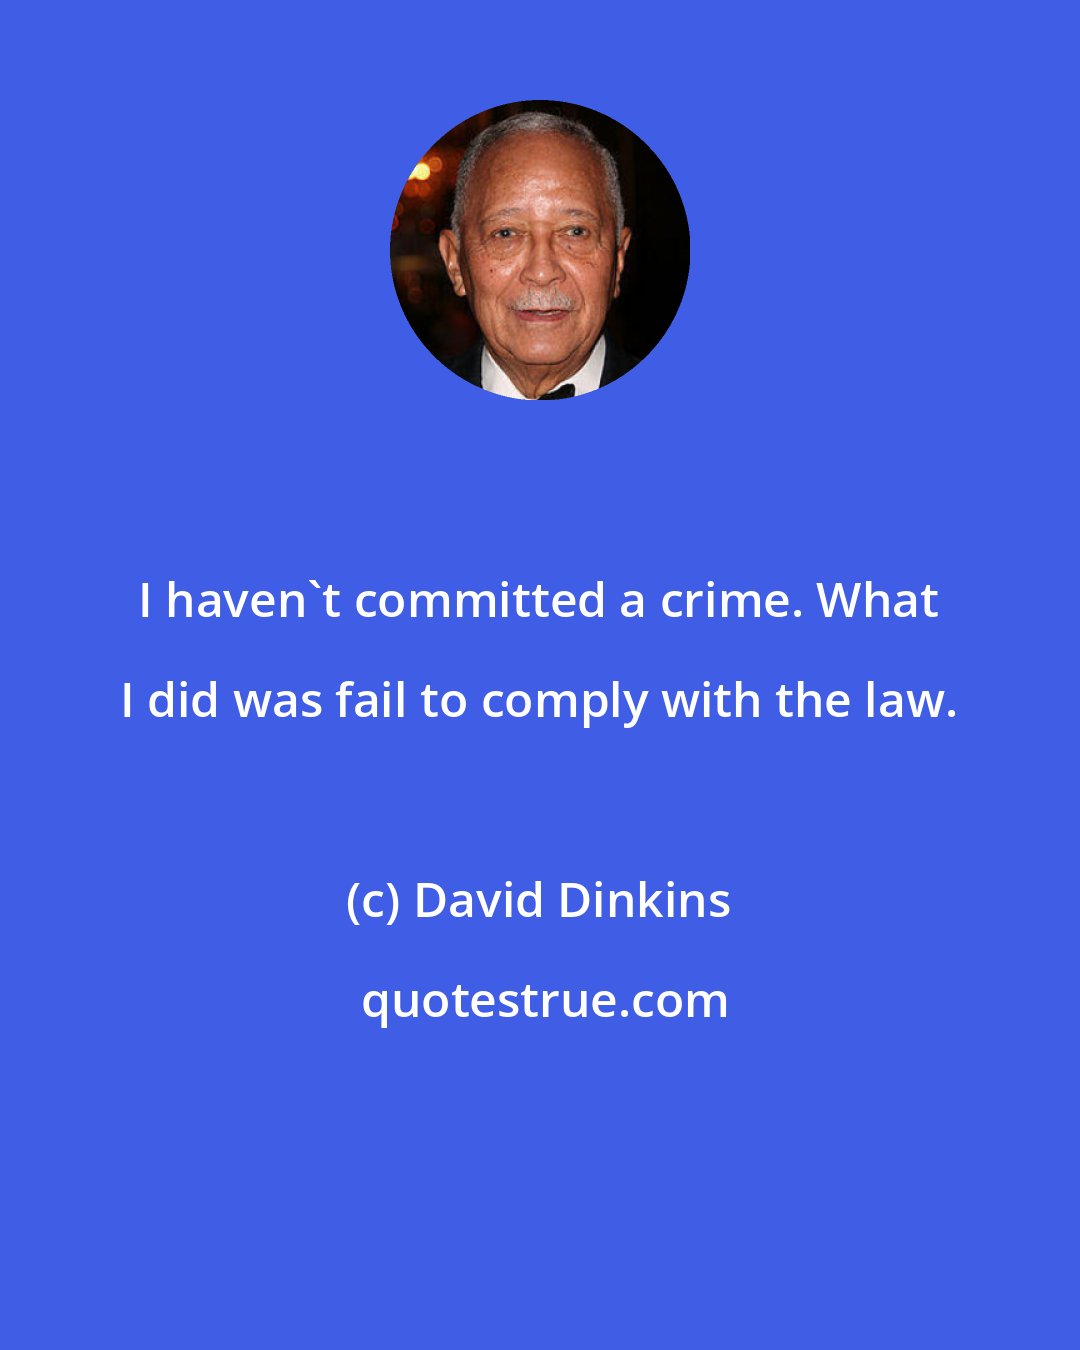 David Dinkins: I haven't committed a crime. What I did was fail to comply with the law.